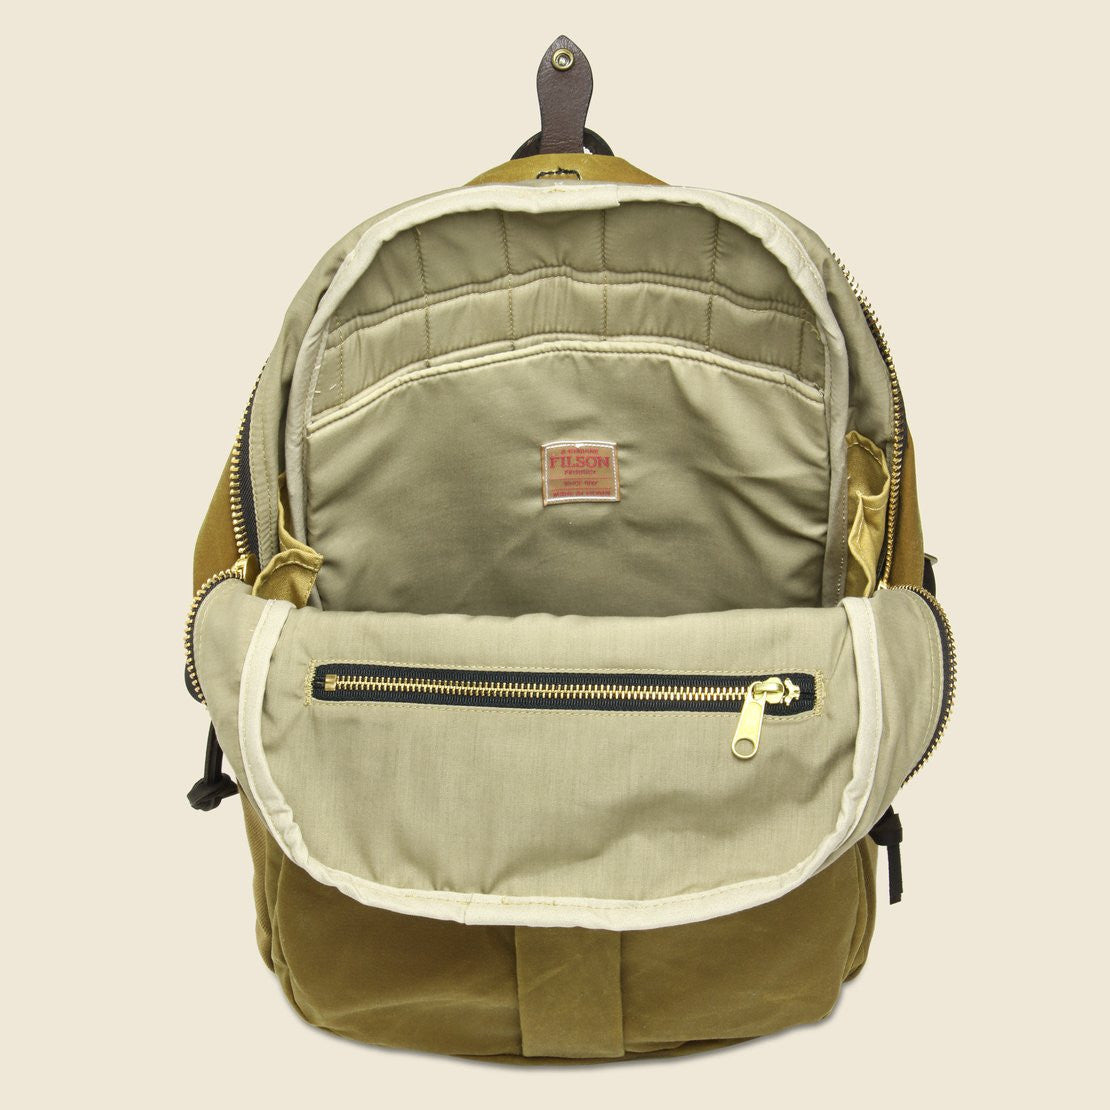 Tin Cloth Journeyman Backpack - Tan - Filson - STAG Provisions - Accessories - Bags / Luggage